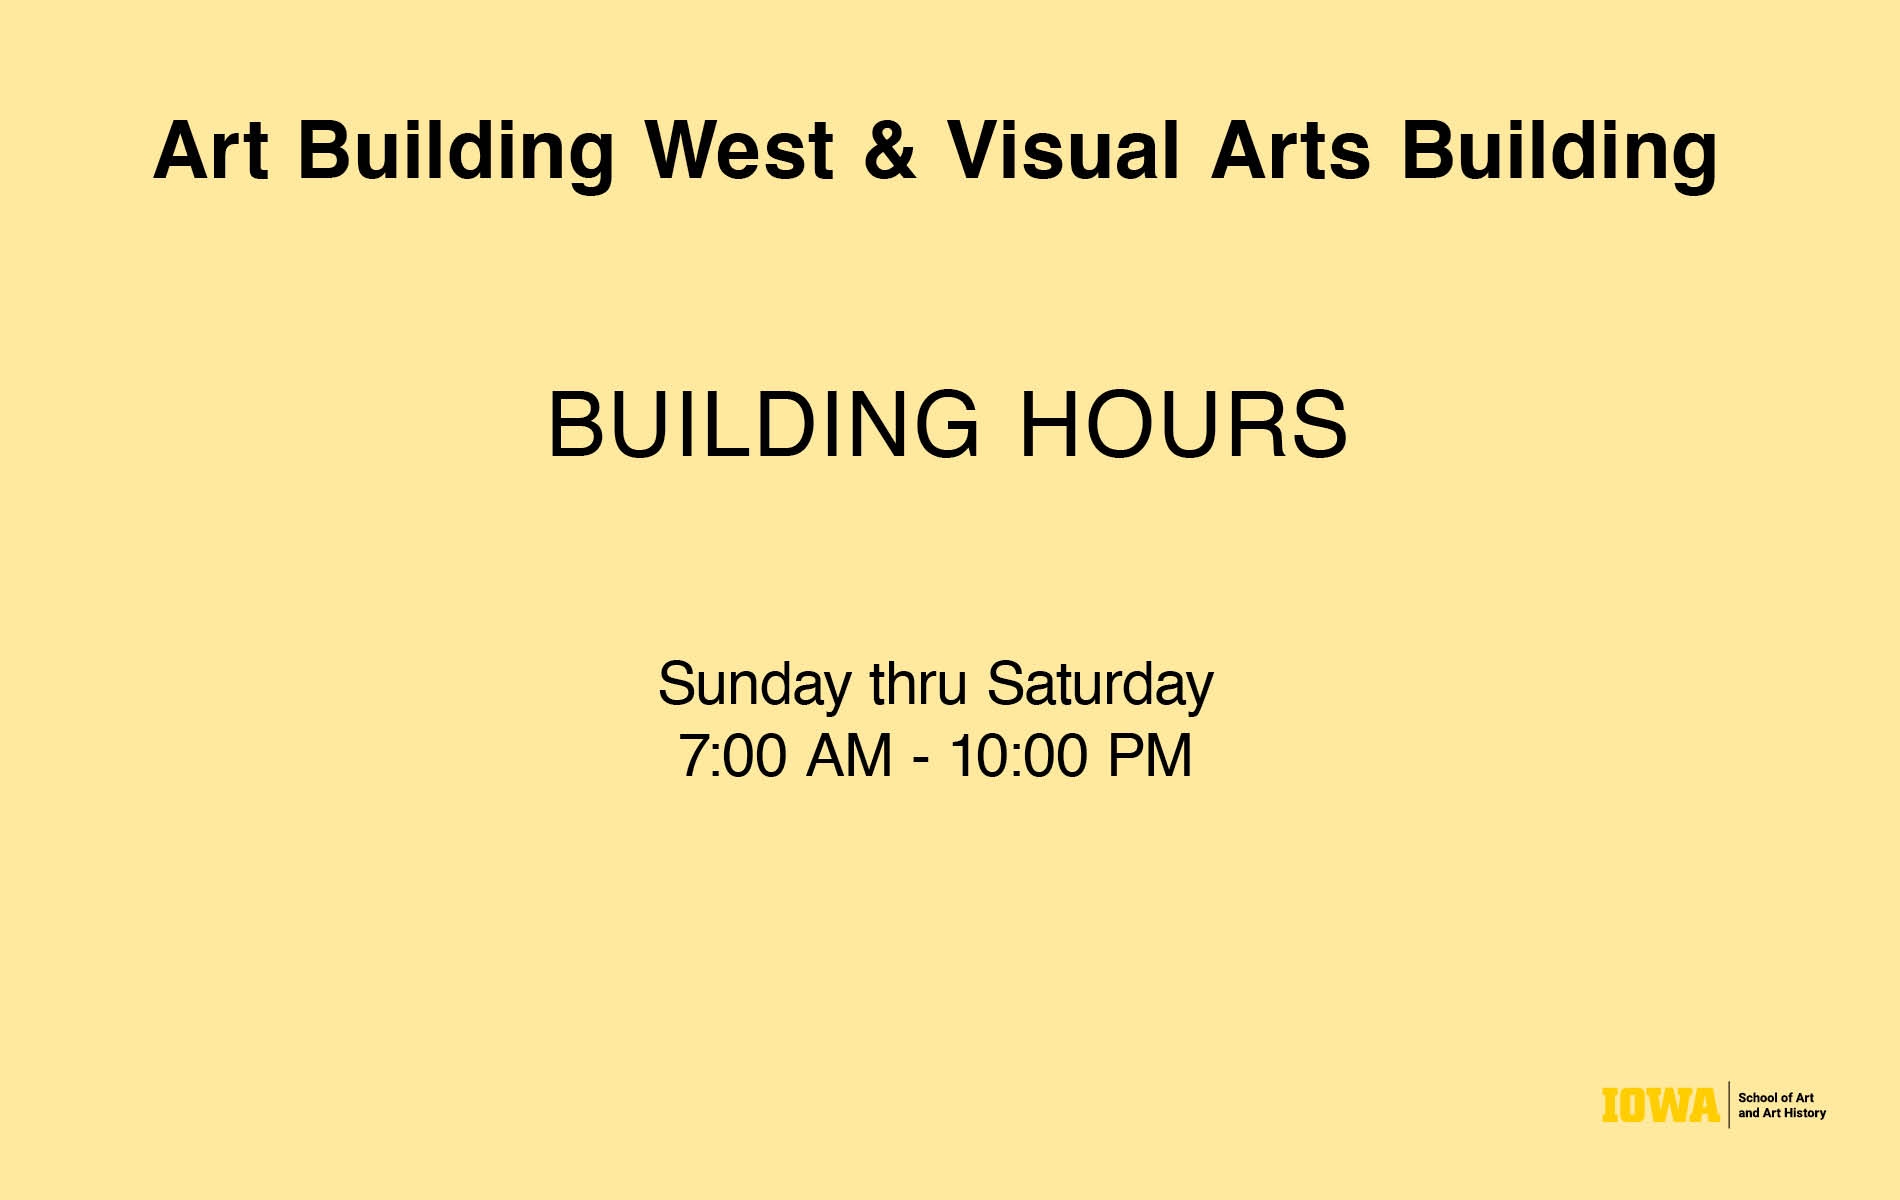 ABW & VAB Building Hours Yellow background black Type 